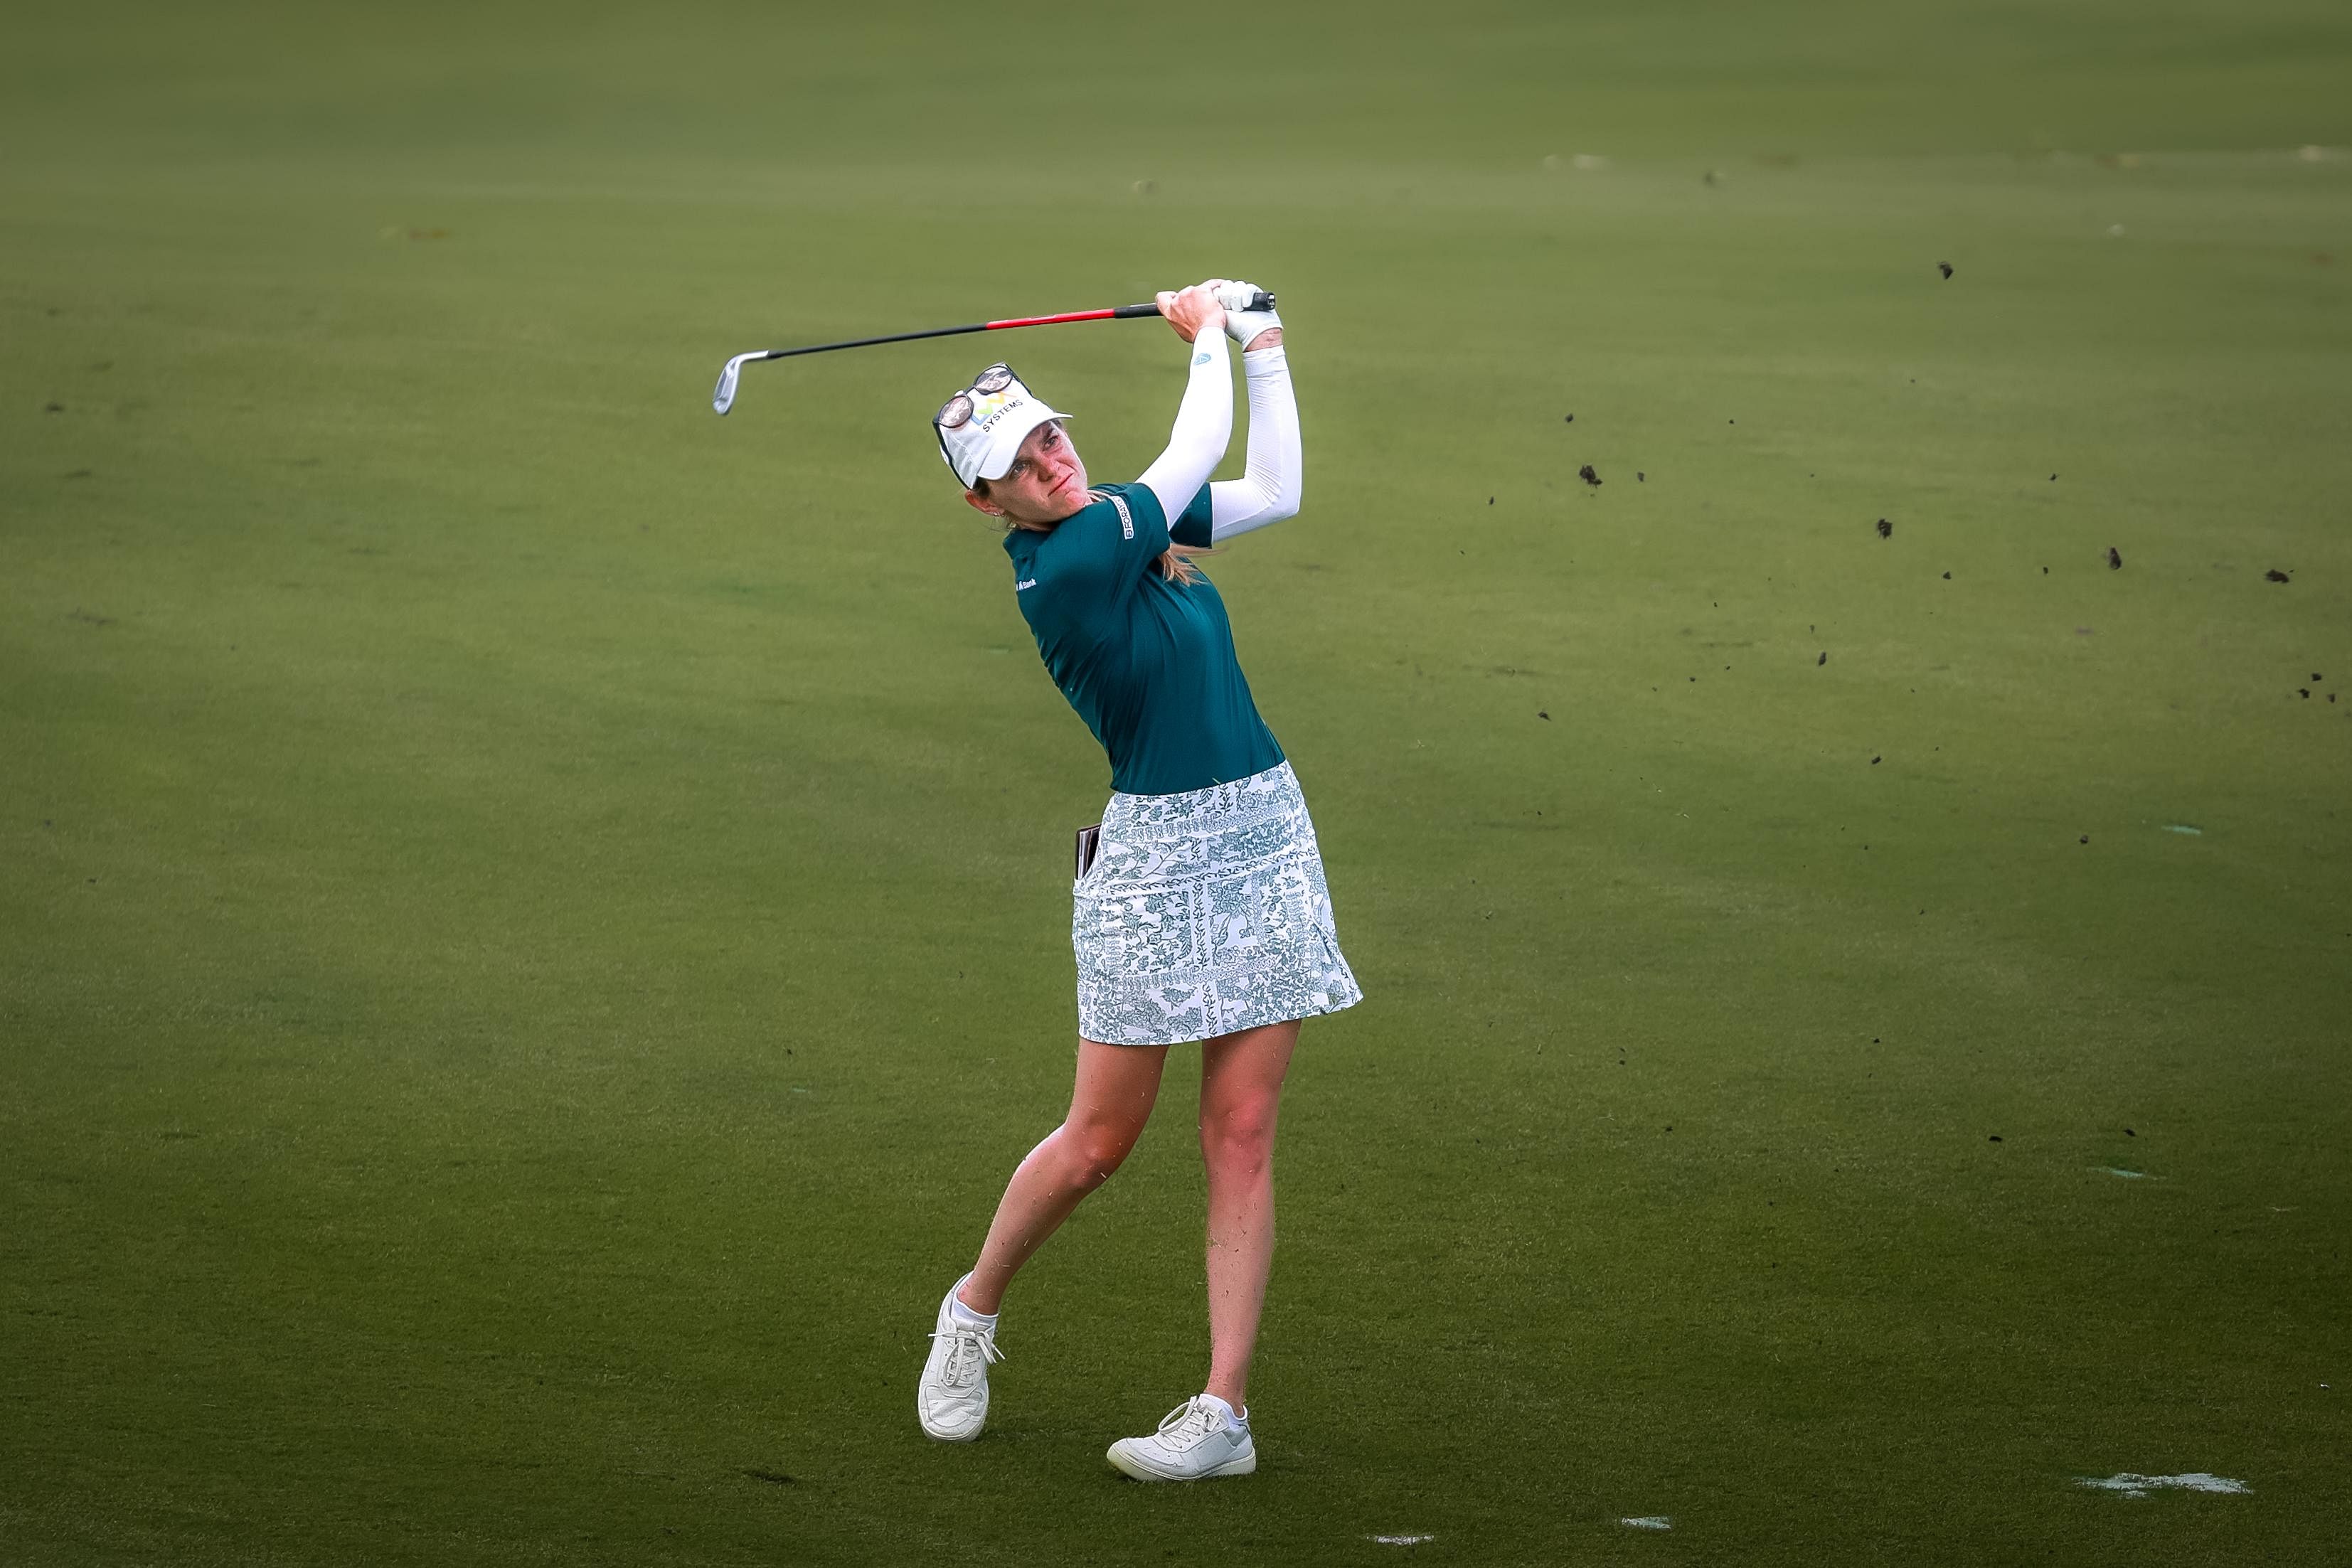 Happy in the heat, American Sarah Schmelzel claims solo lead at HSBC Women’s World Championship